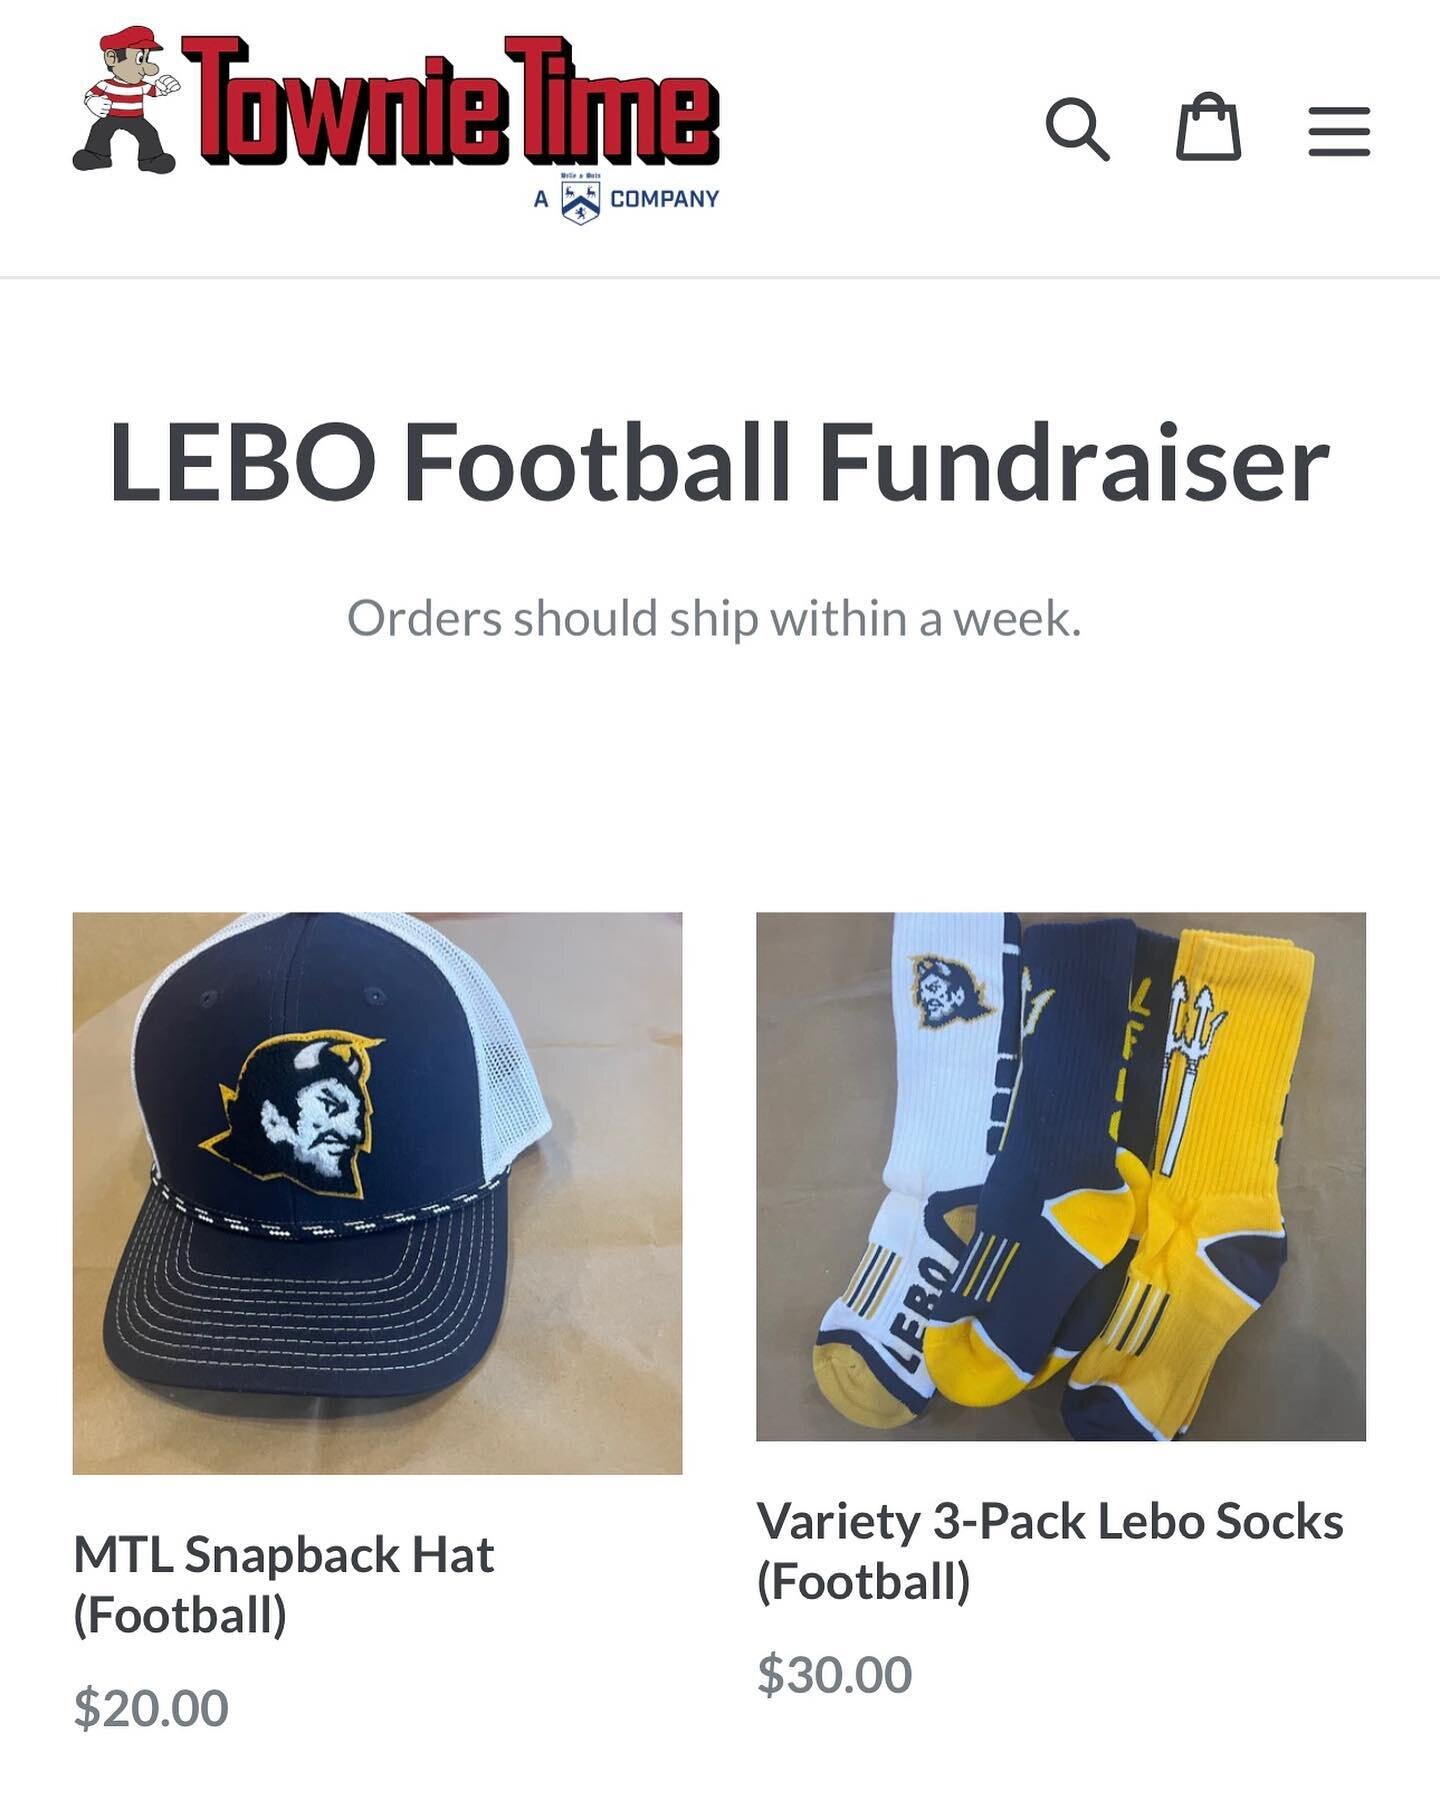 Looking for some new Lebo Football swag? Follow the link below or click the link in our bio to grab some new gear!

https://townietime.com/collections/football-fundraiser

#LetsGoLebo #LeboYouthFootball #LeboFootball #LeboSwag